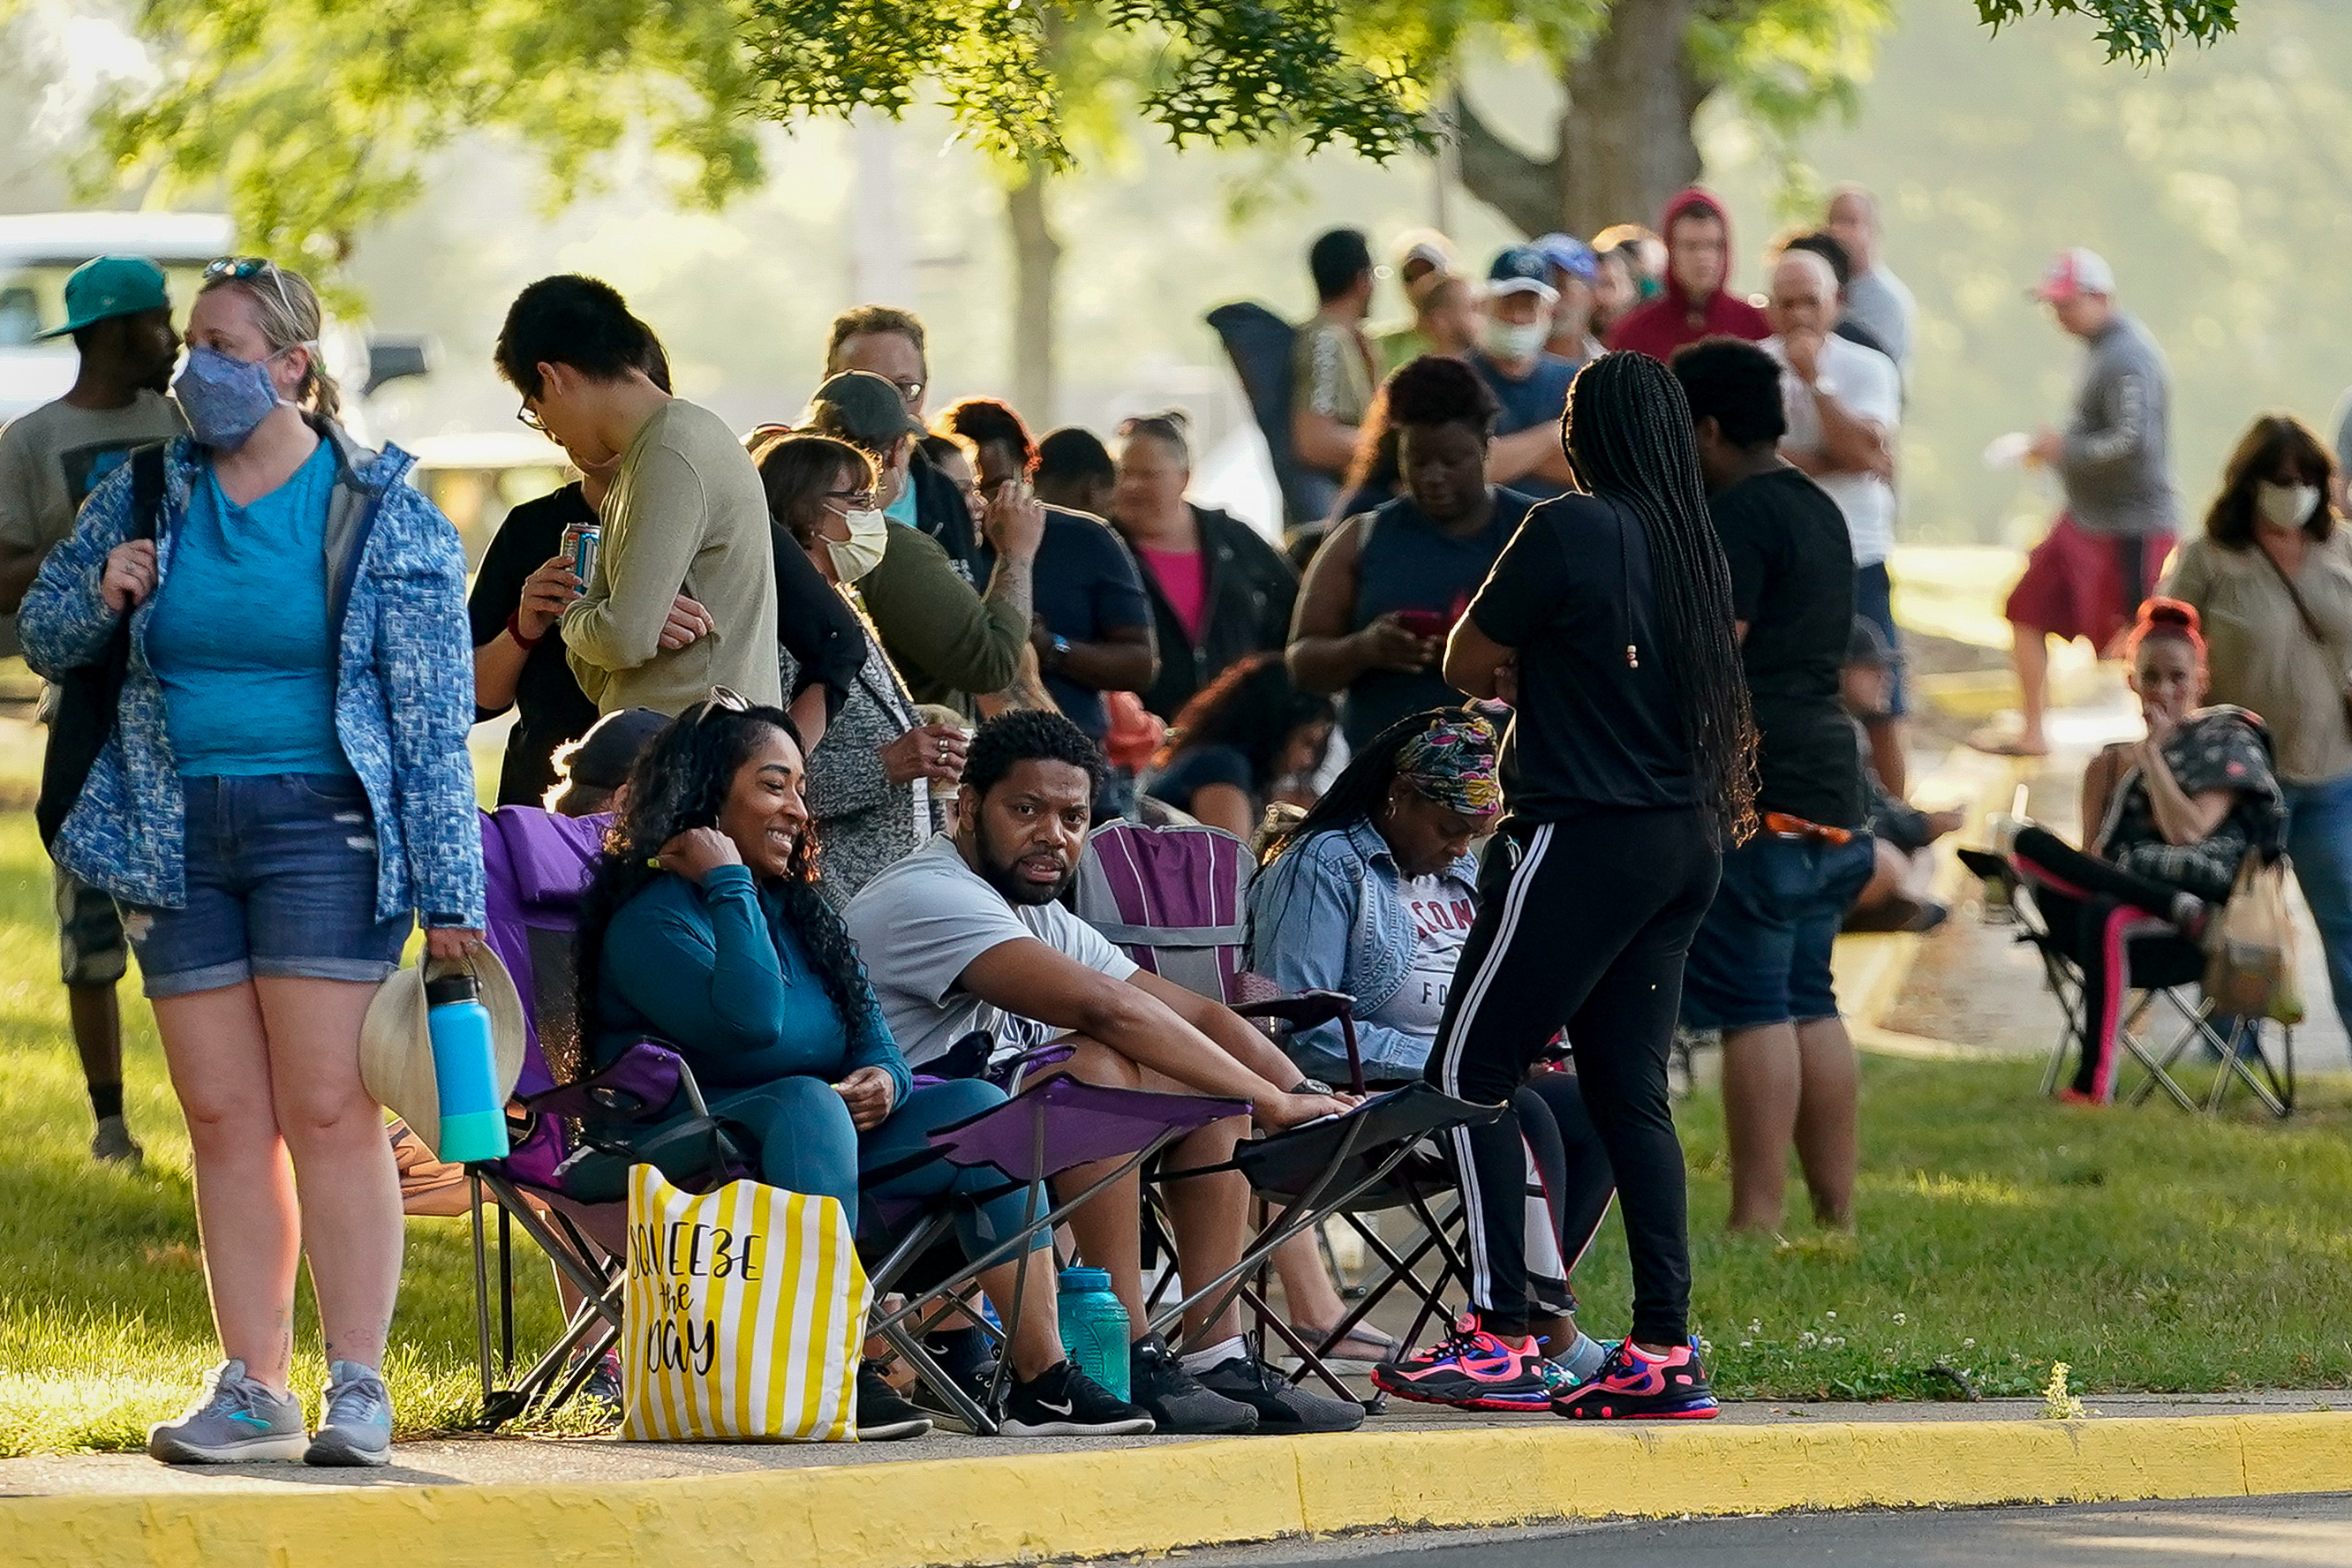 Hundreds of people line up outside the Kentucky Career Center, over two hours prior to its opening,  to find assistance with their unemployment claims, in Frankfort, Kentucky, U.S. June 18, 2020. REUTERS/Bryan Woolston